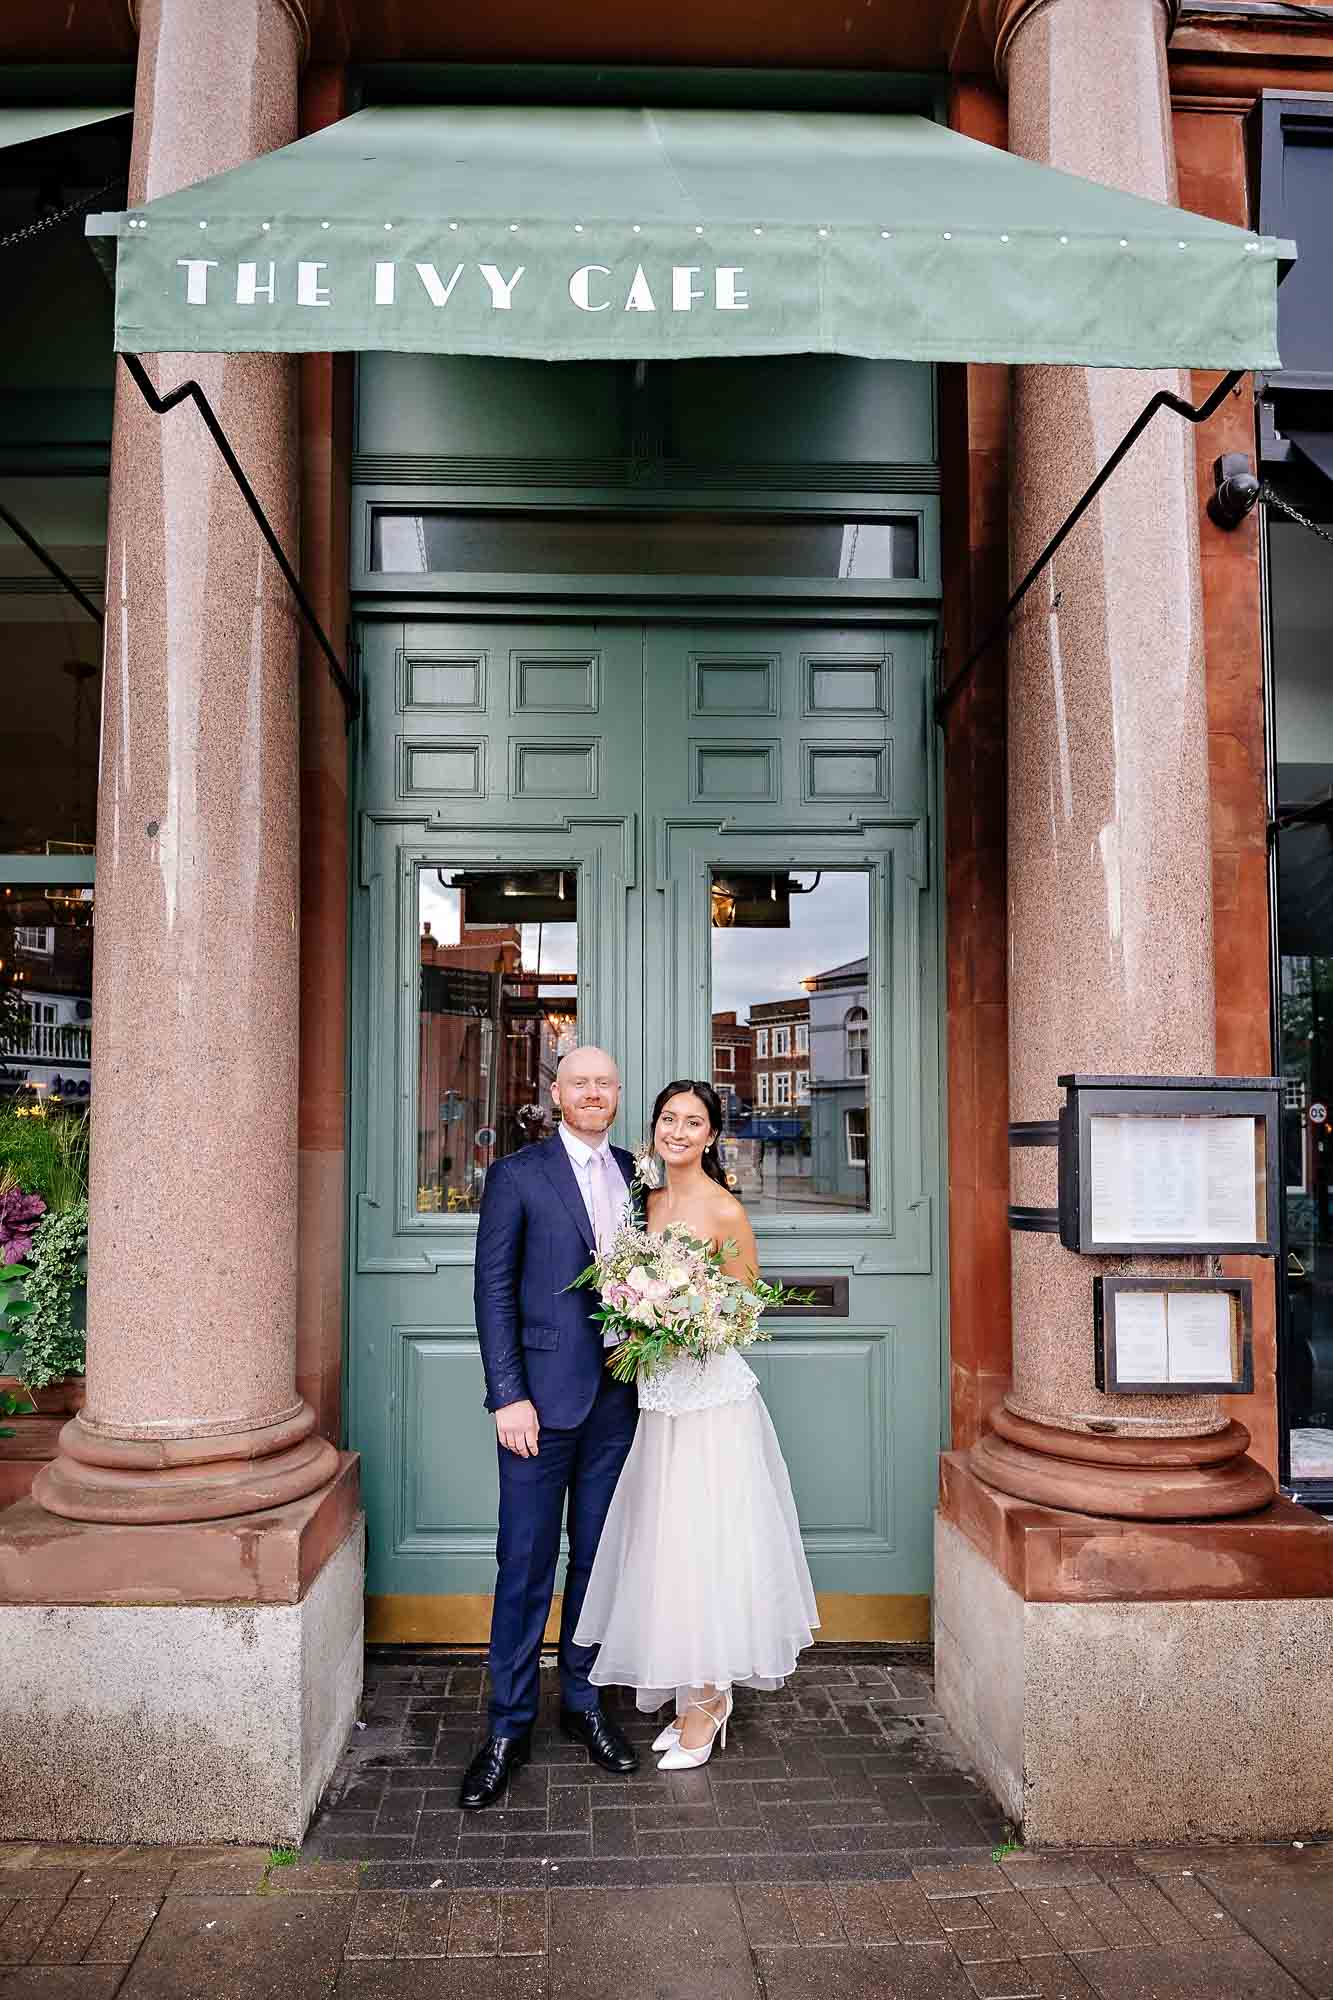 Couple standing outside the Ivy Cafe in Wimbledon before their wedding reception